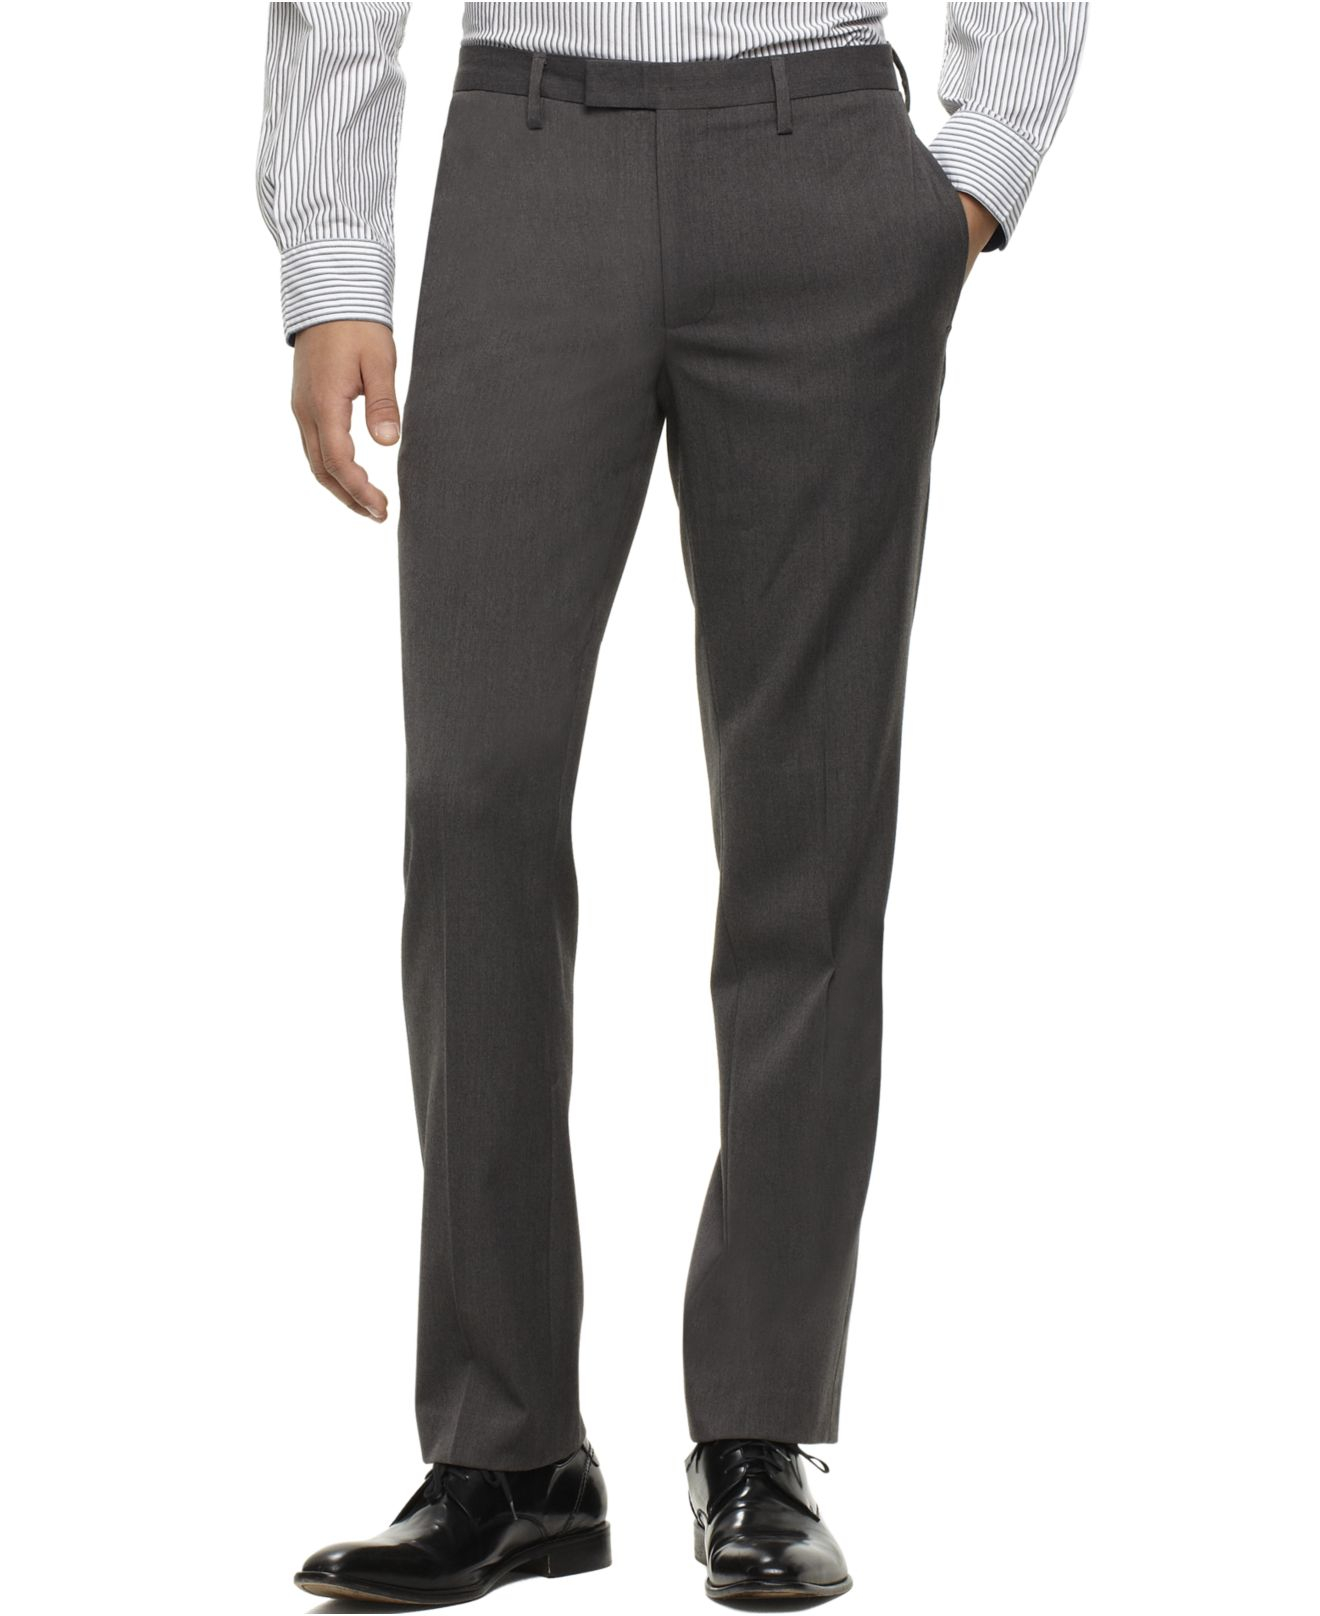 Lyst - Kenneth Cole Reaction Pants, Slim Fit Dress Pants in Gray for Men